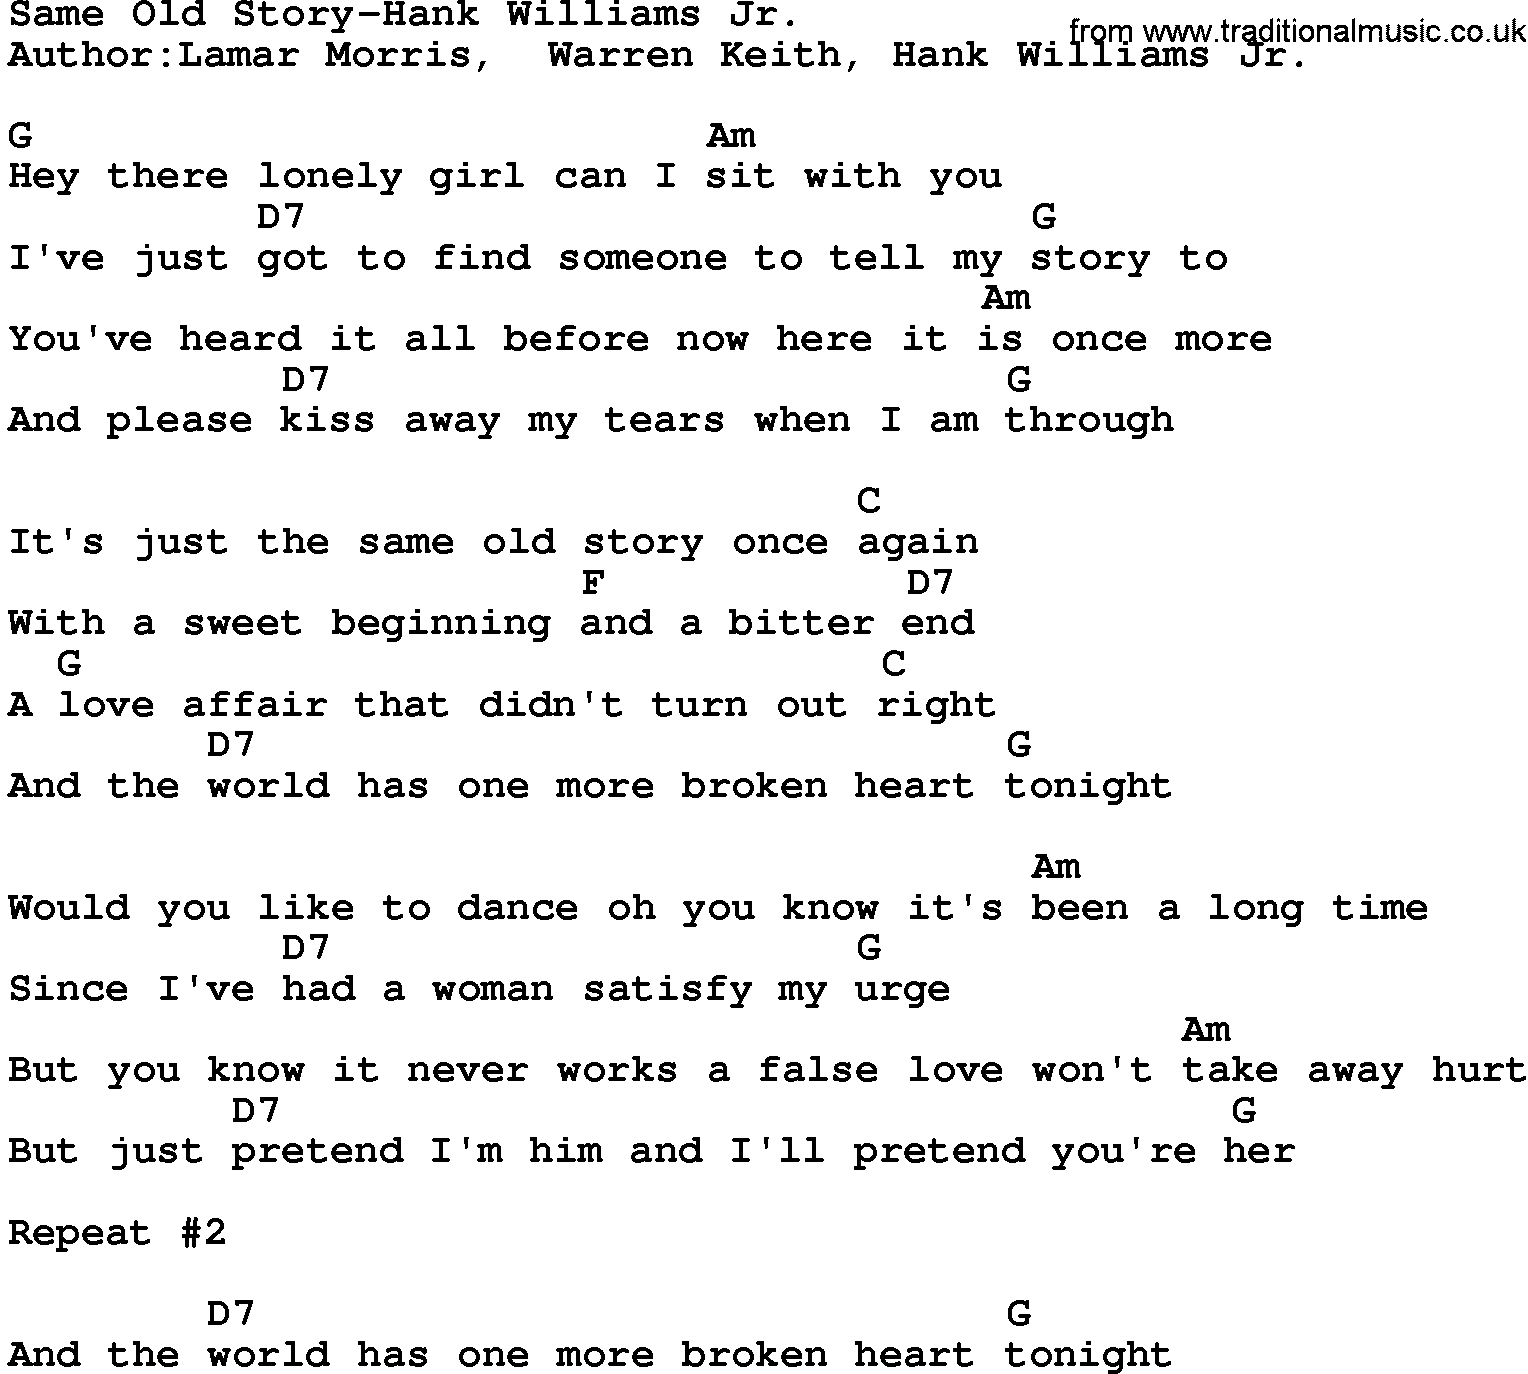 Country music song: Same Old Story-Hank Williams Jr lyrics and chords